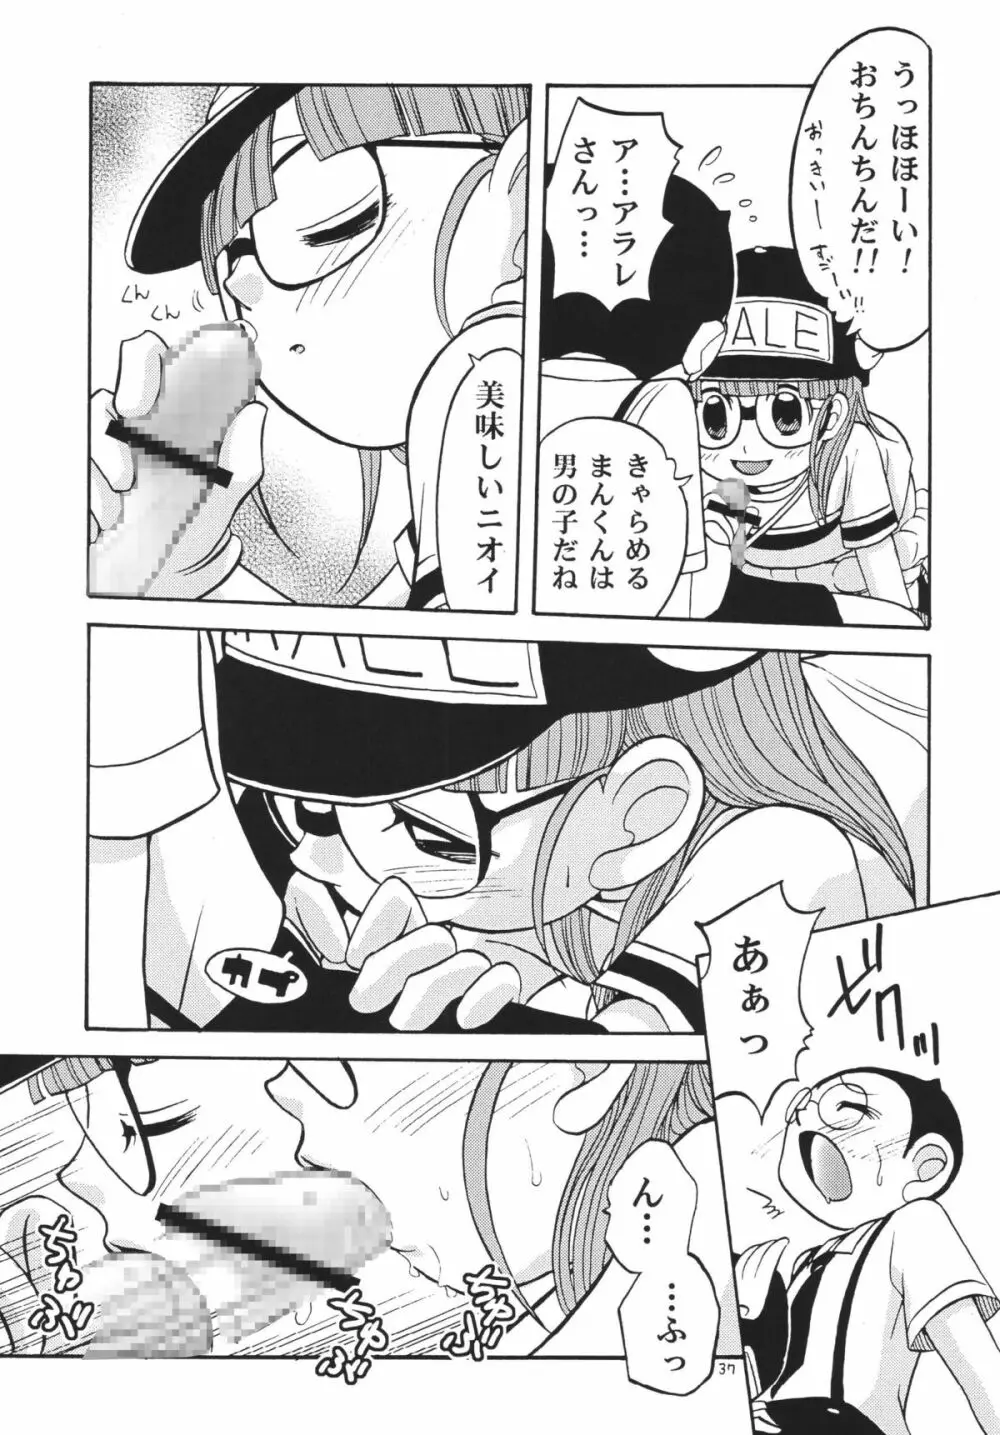 PROJECT ARALE - page36